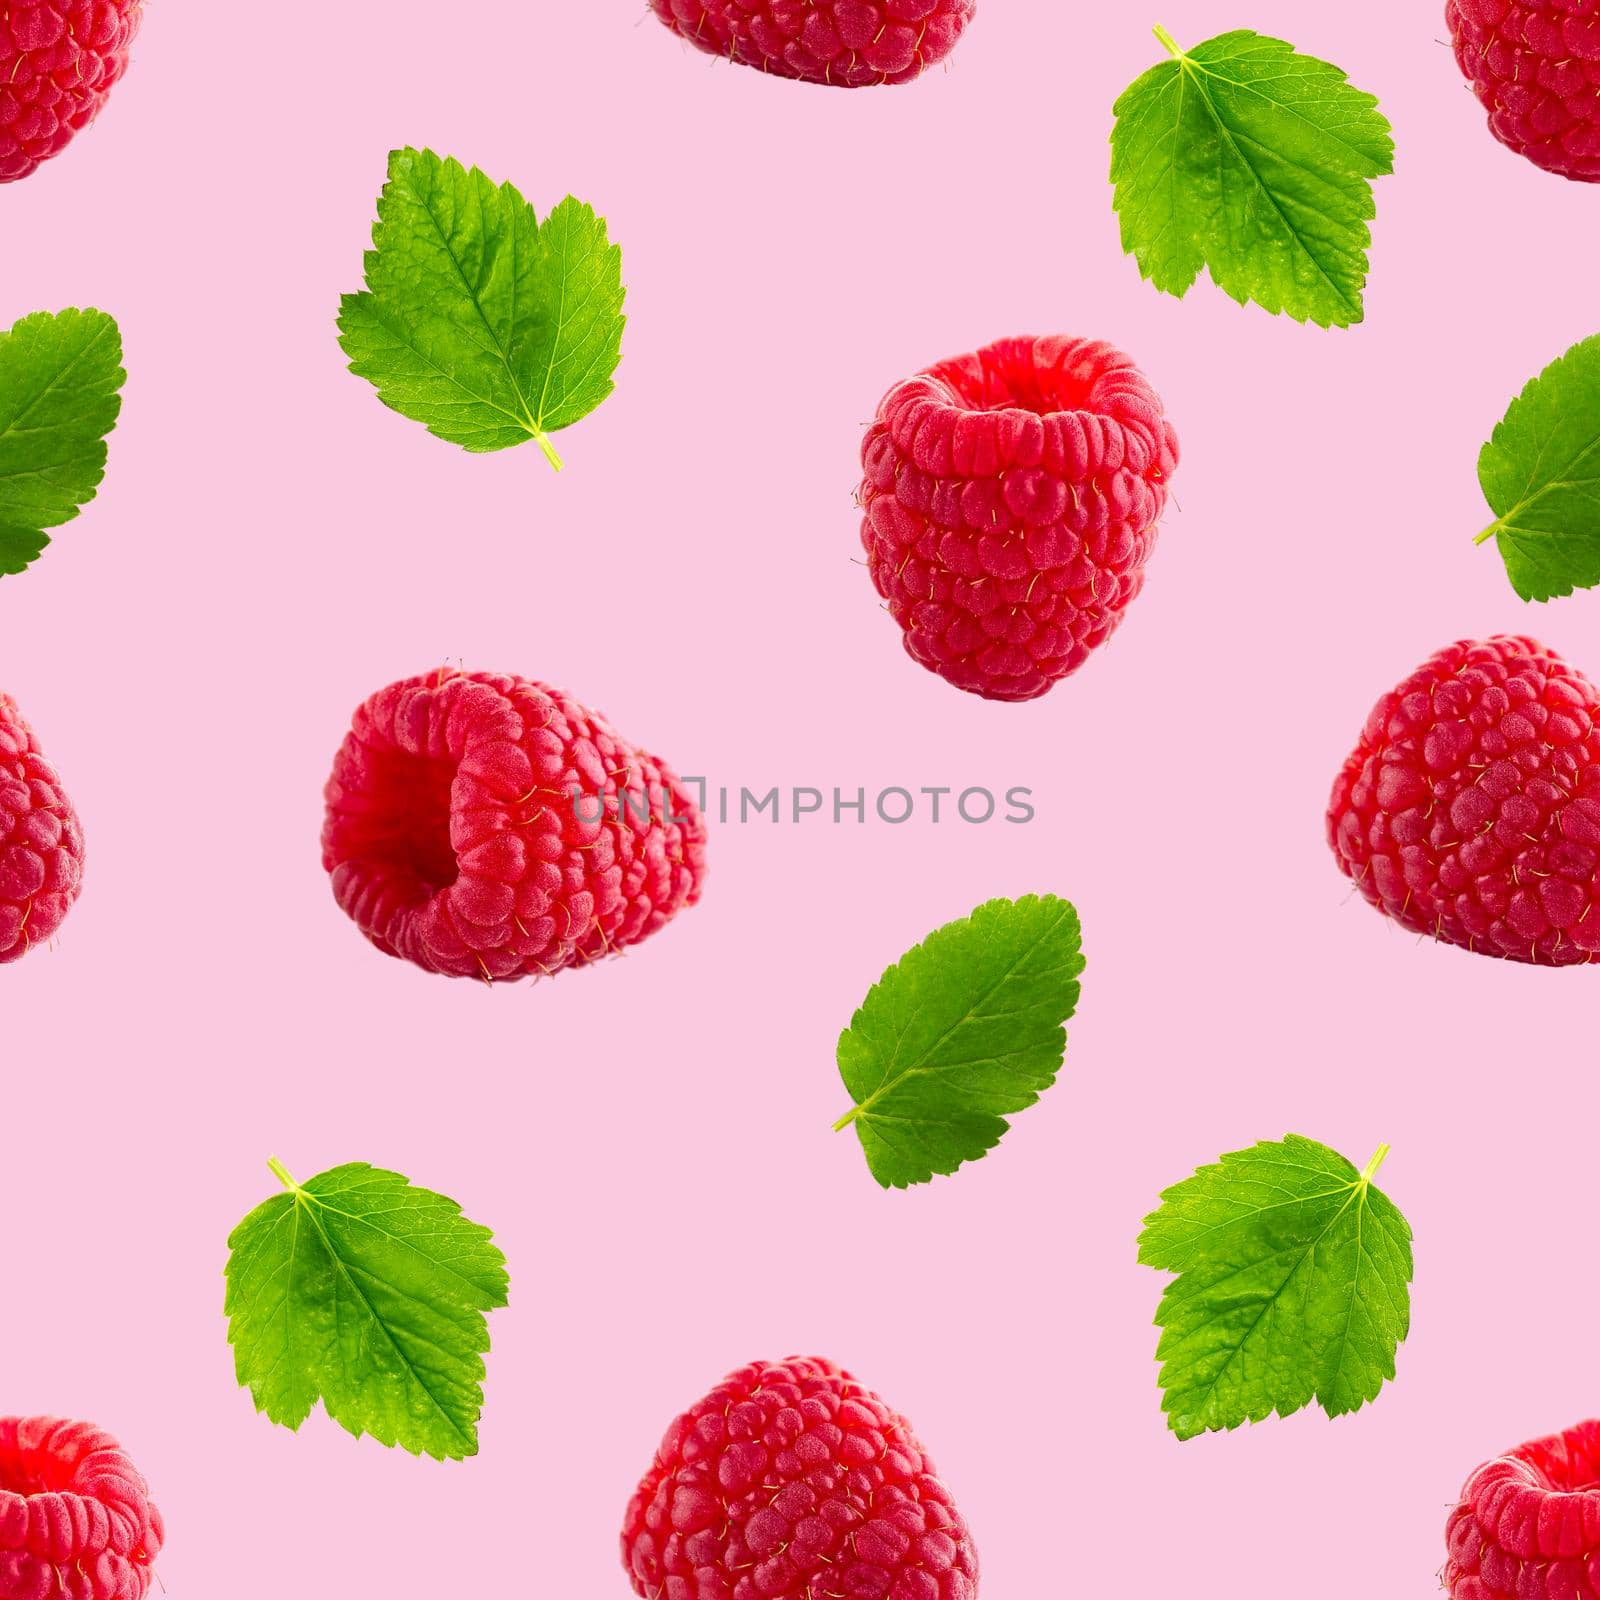 Seamless pattern with ripe raspberry. Berries abstract background. Raspberry pattern for package design with pink background.